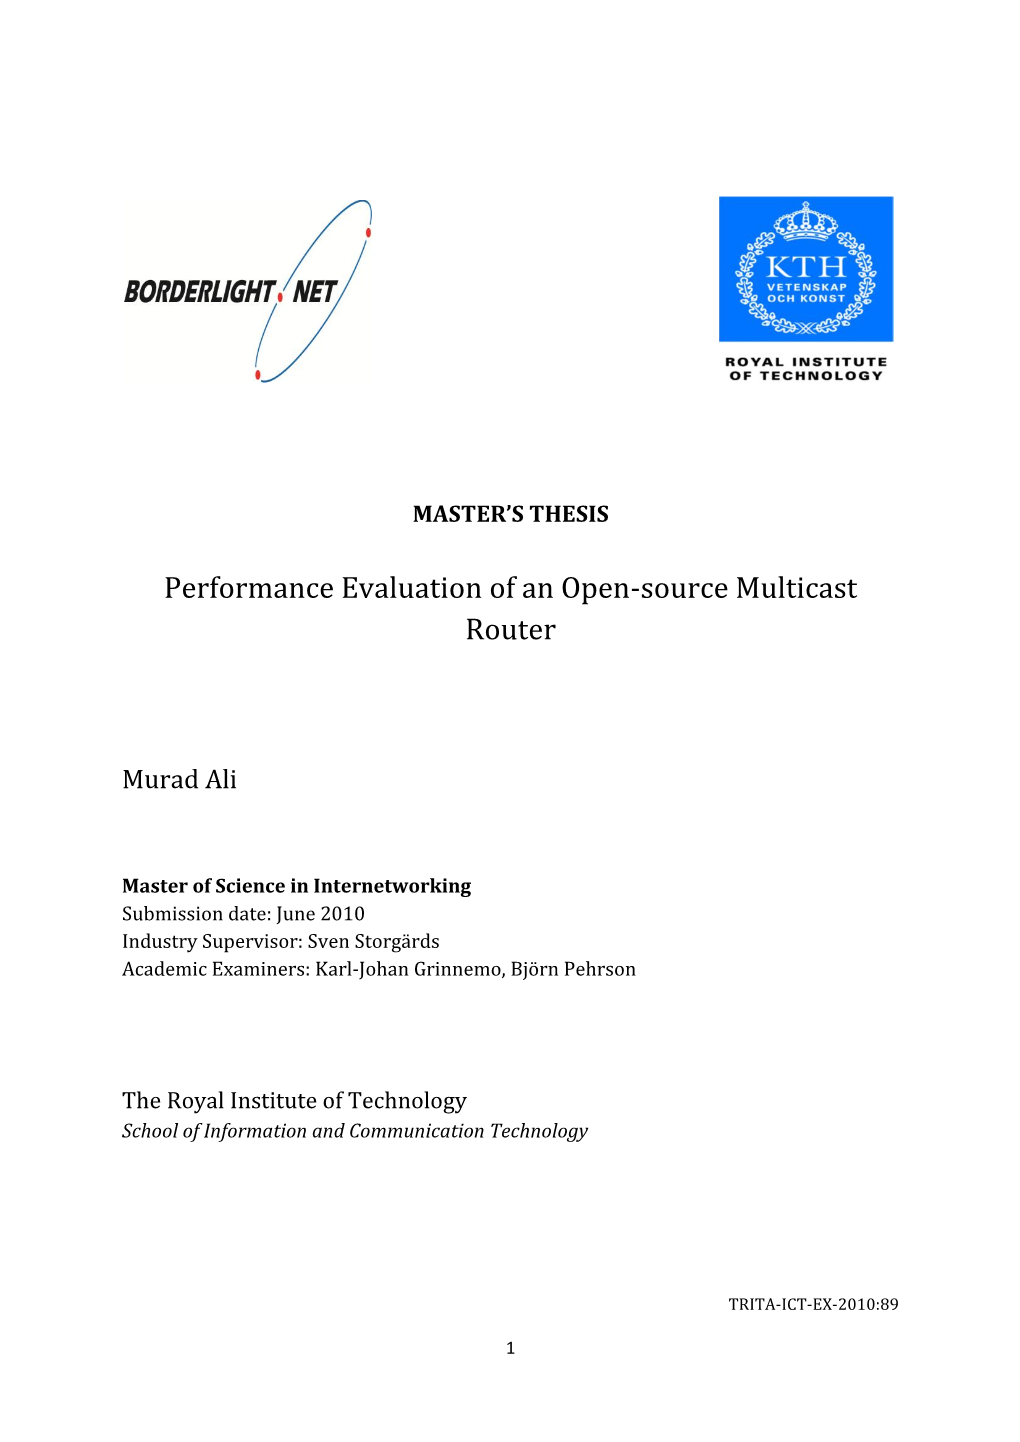 Performance Evaluation of an Open-Source Multicast Router